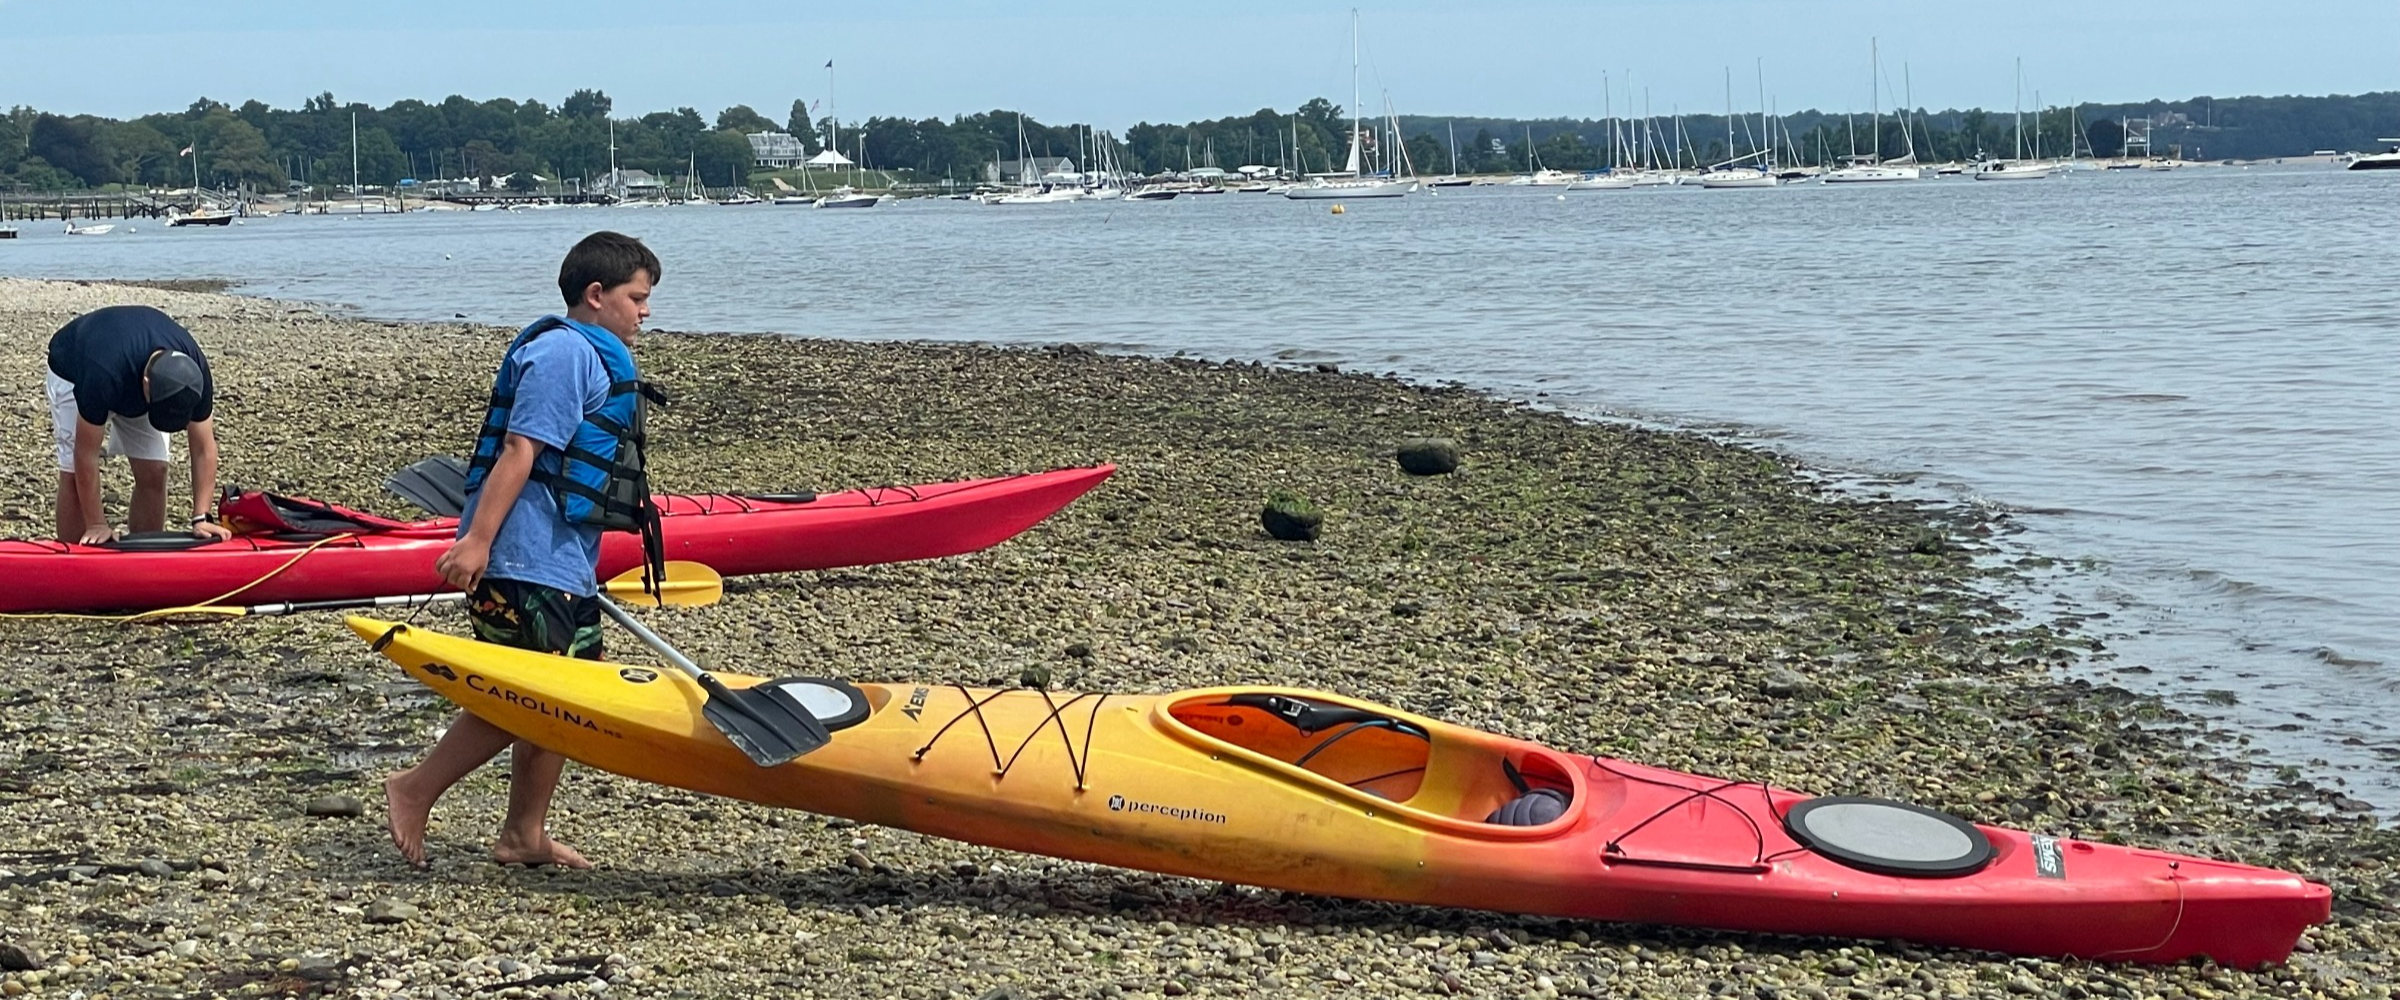 At the edge of a rocky shoreline, a child pushes a yellow kayak into the water.